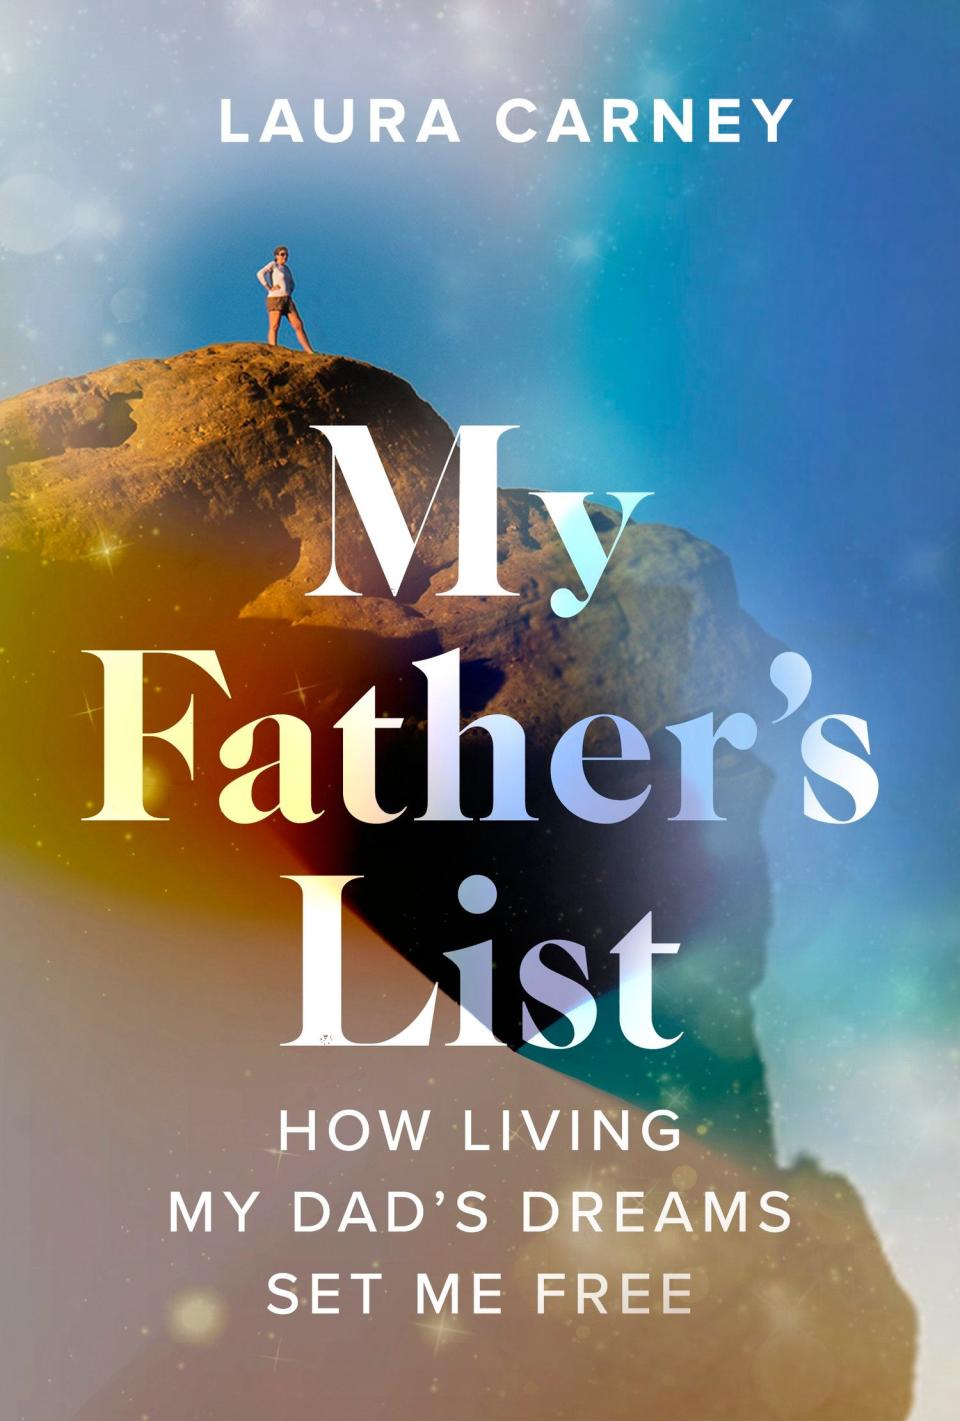 "My Father's List," Carney's book detailing how she completed the remaining 54 items on her late father's bucket list.